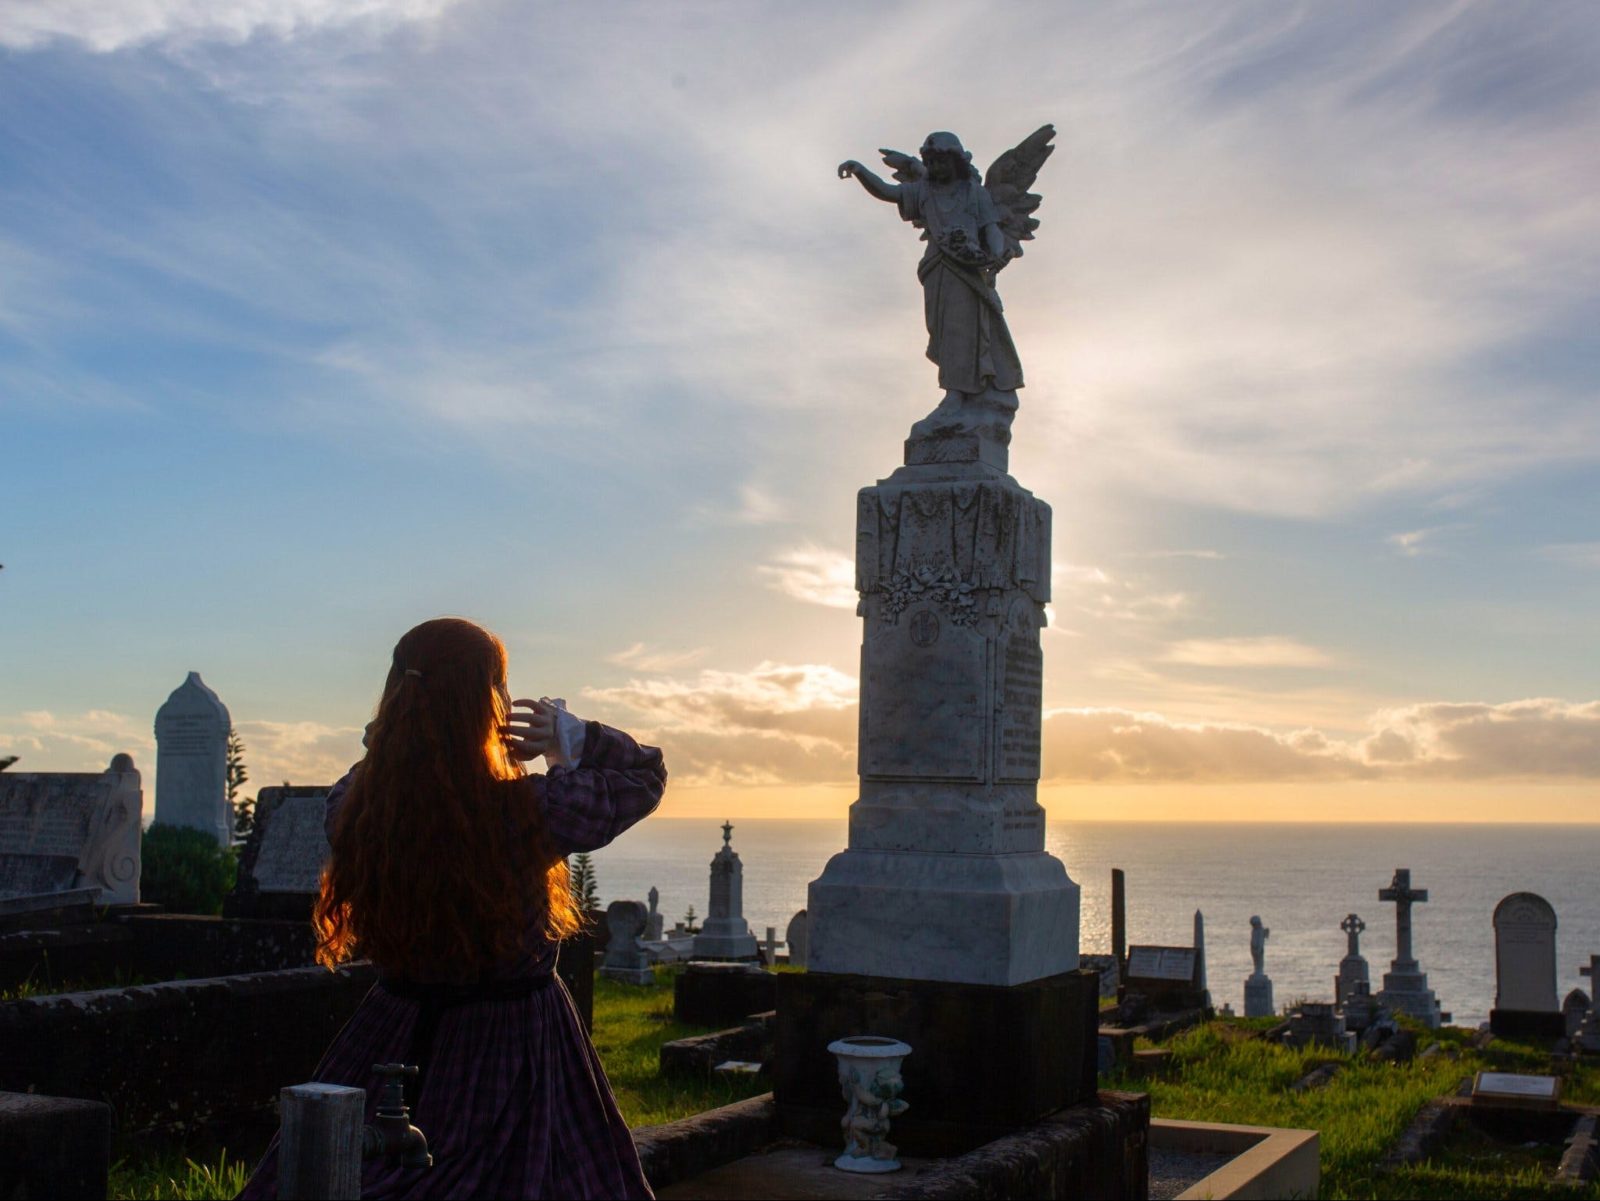 Anne Brontë (Casey Anne Martin) praying in the graveyard by an angel